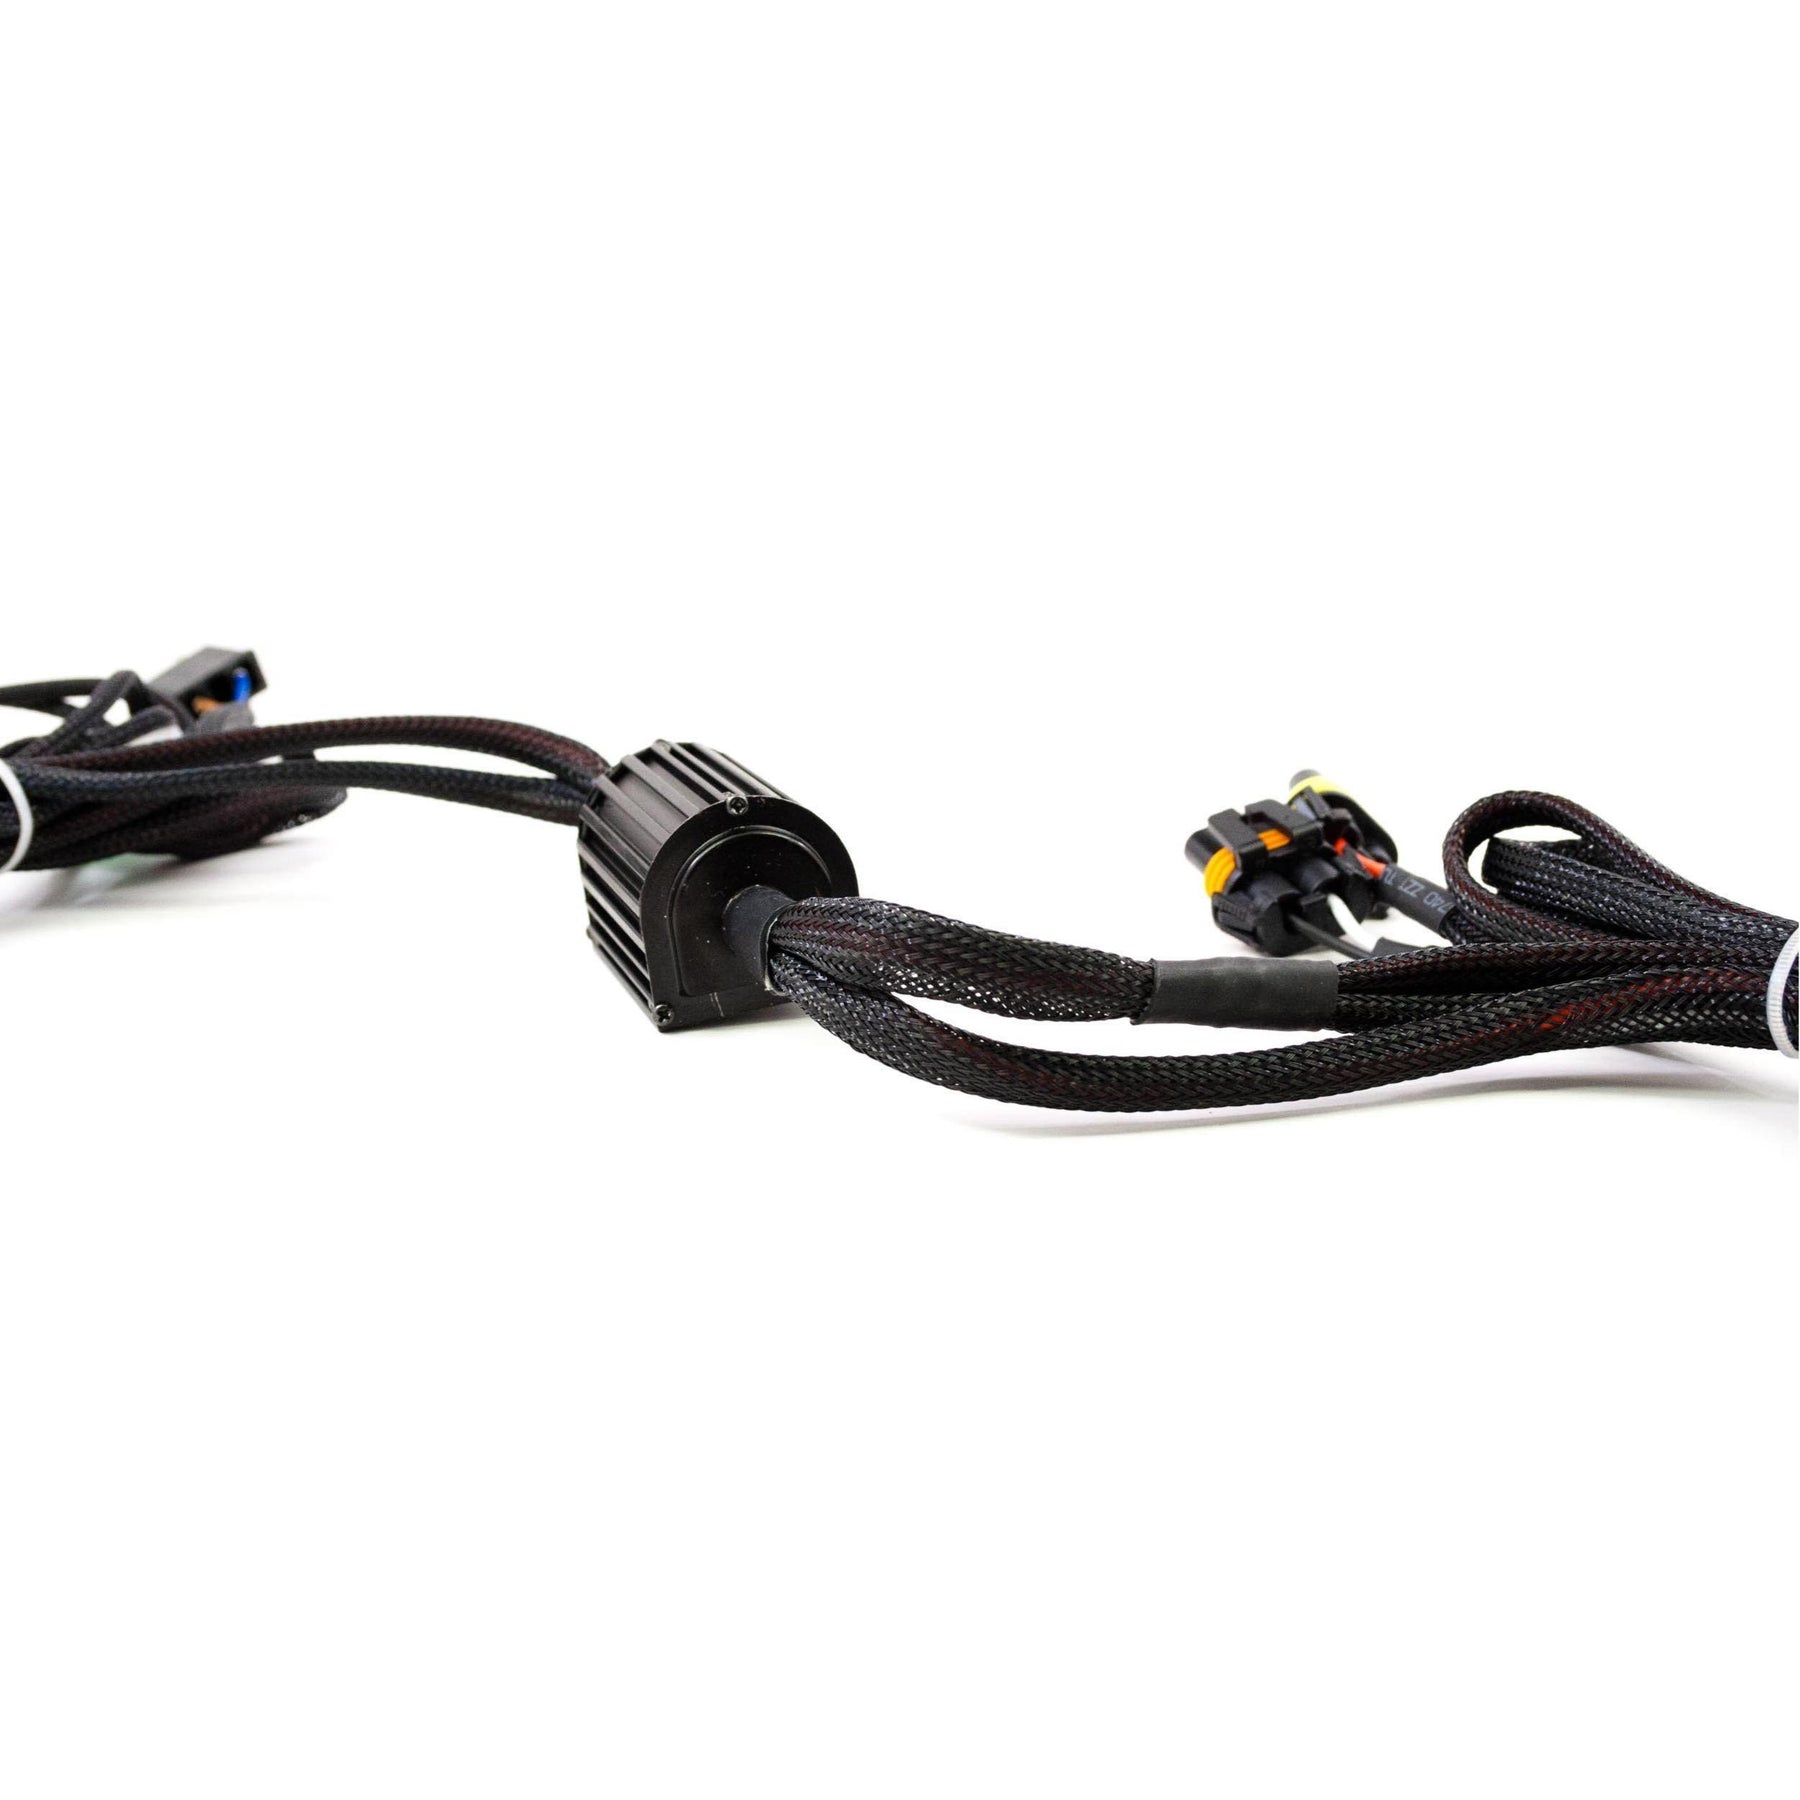 H7 Motorcycle Single Output HID Harness (H151)-Lighting Harness-Morimoto-H151-Dirty Diesel Customs